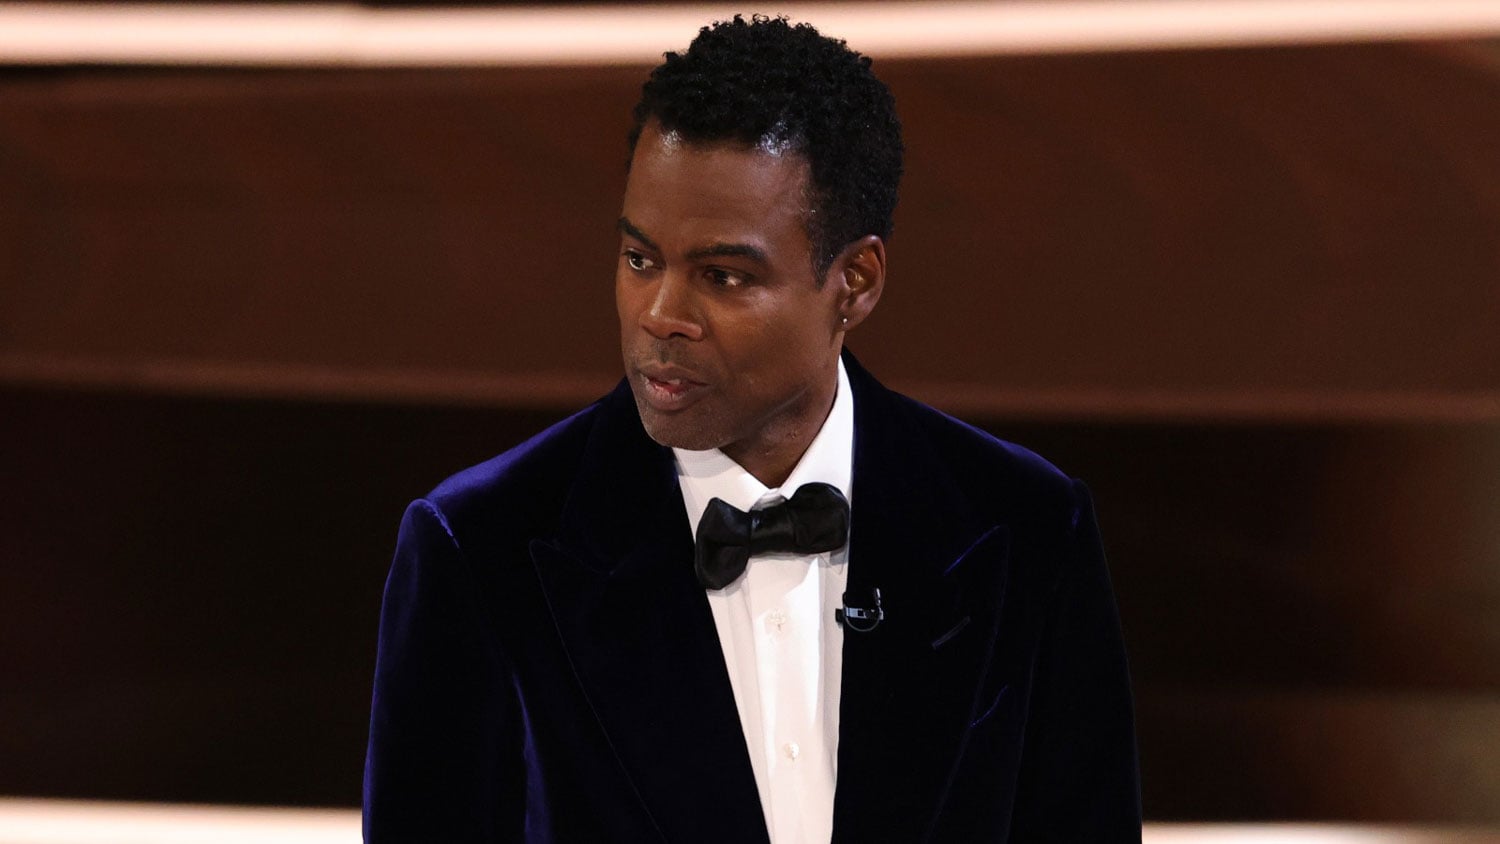 chris-rock-not-pressing-charges-against-will-smith-after-oscar-slap